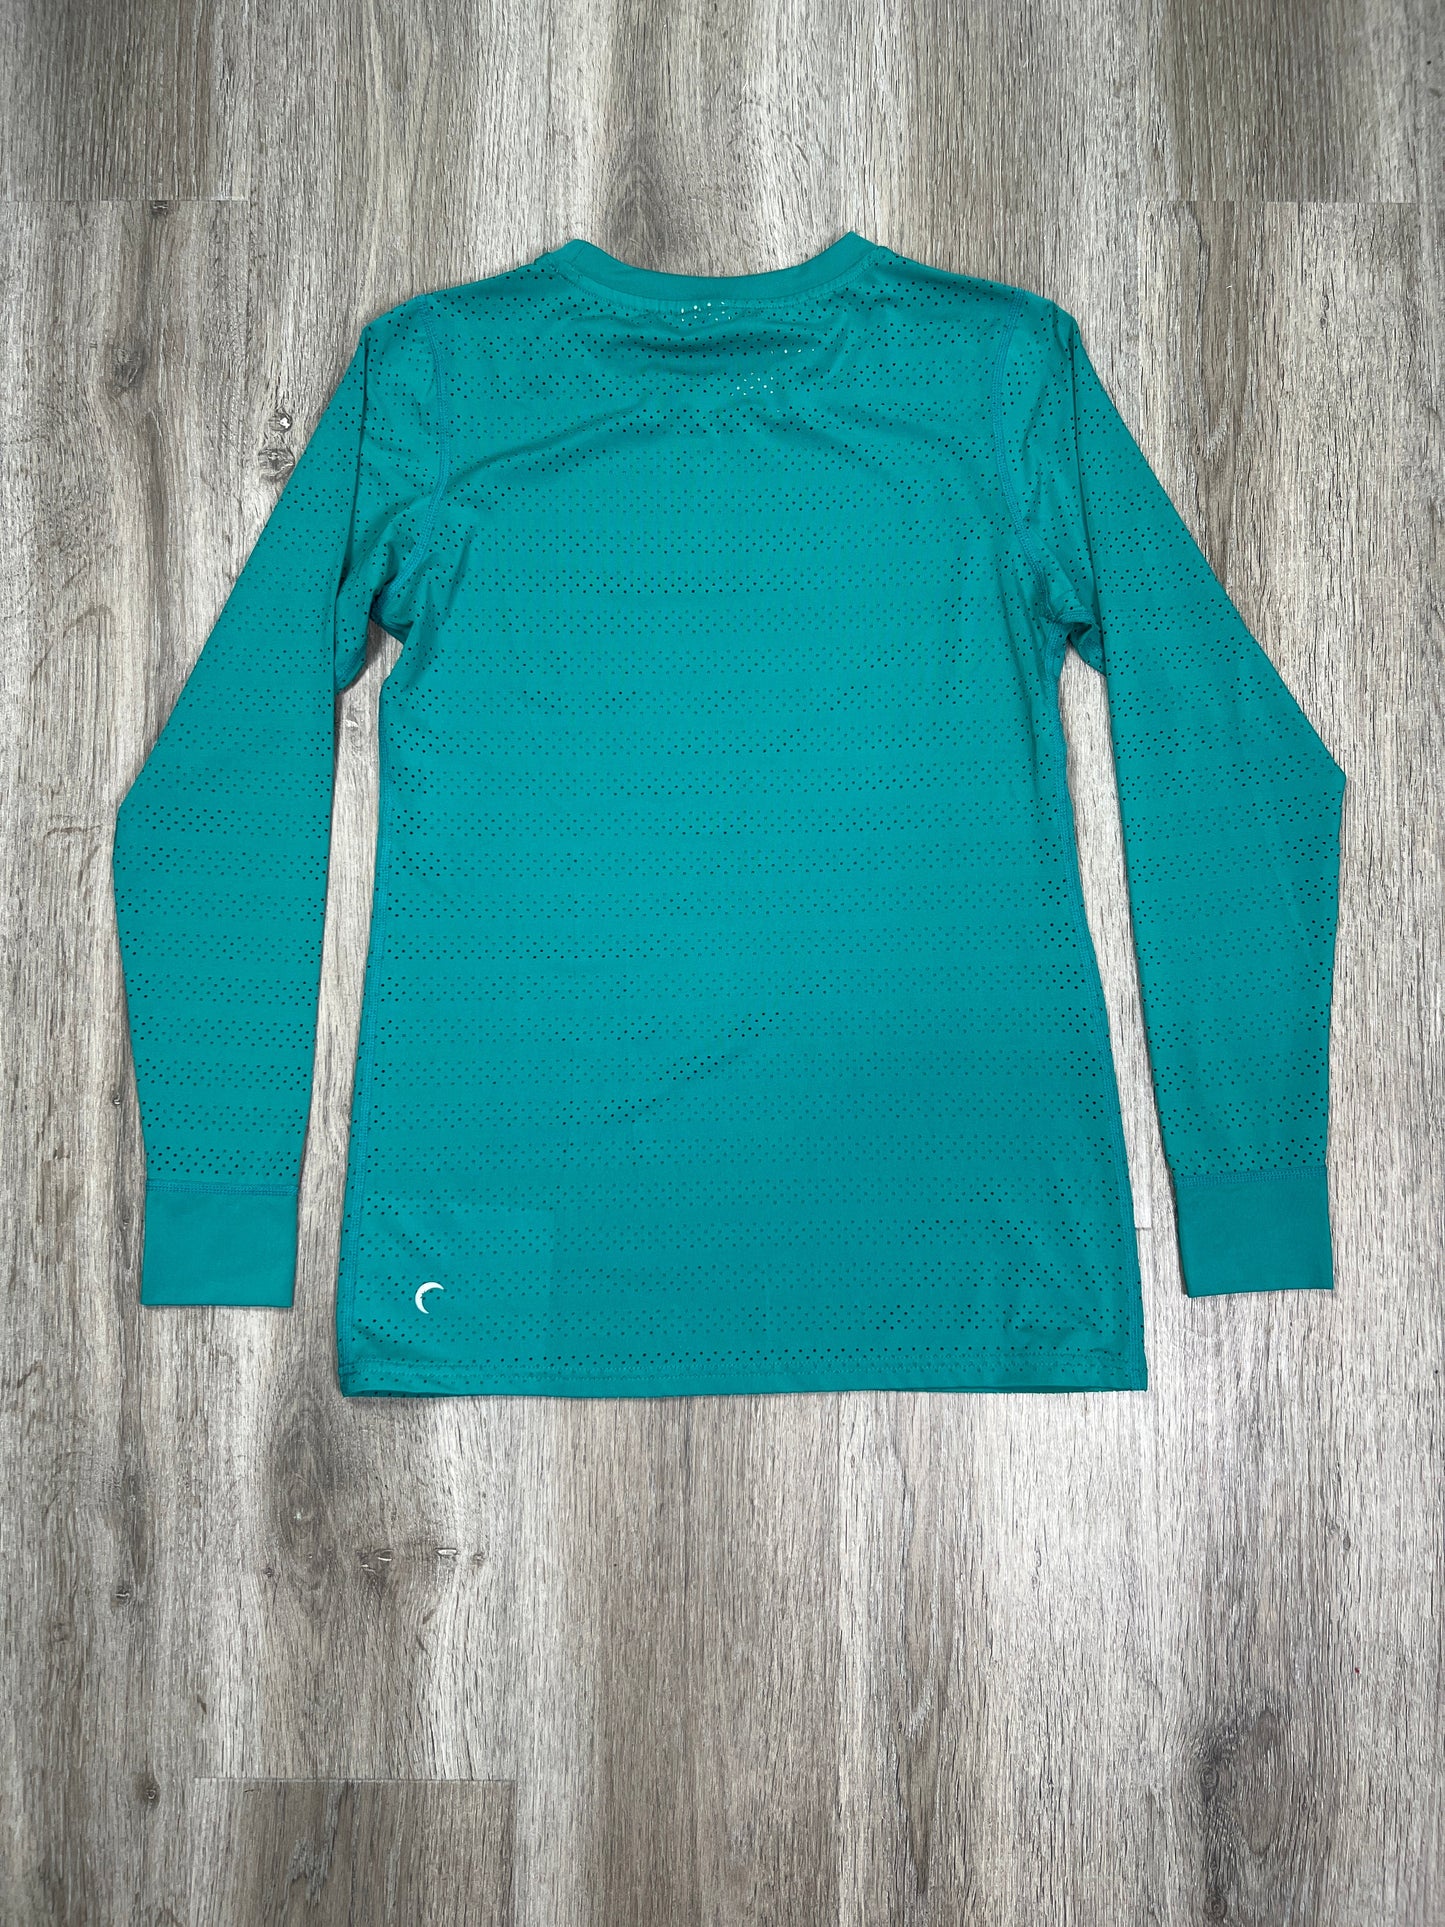 Teal Athletic Top Long Sleeve Crewneck Zyia, Size S